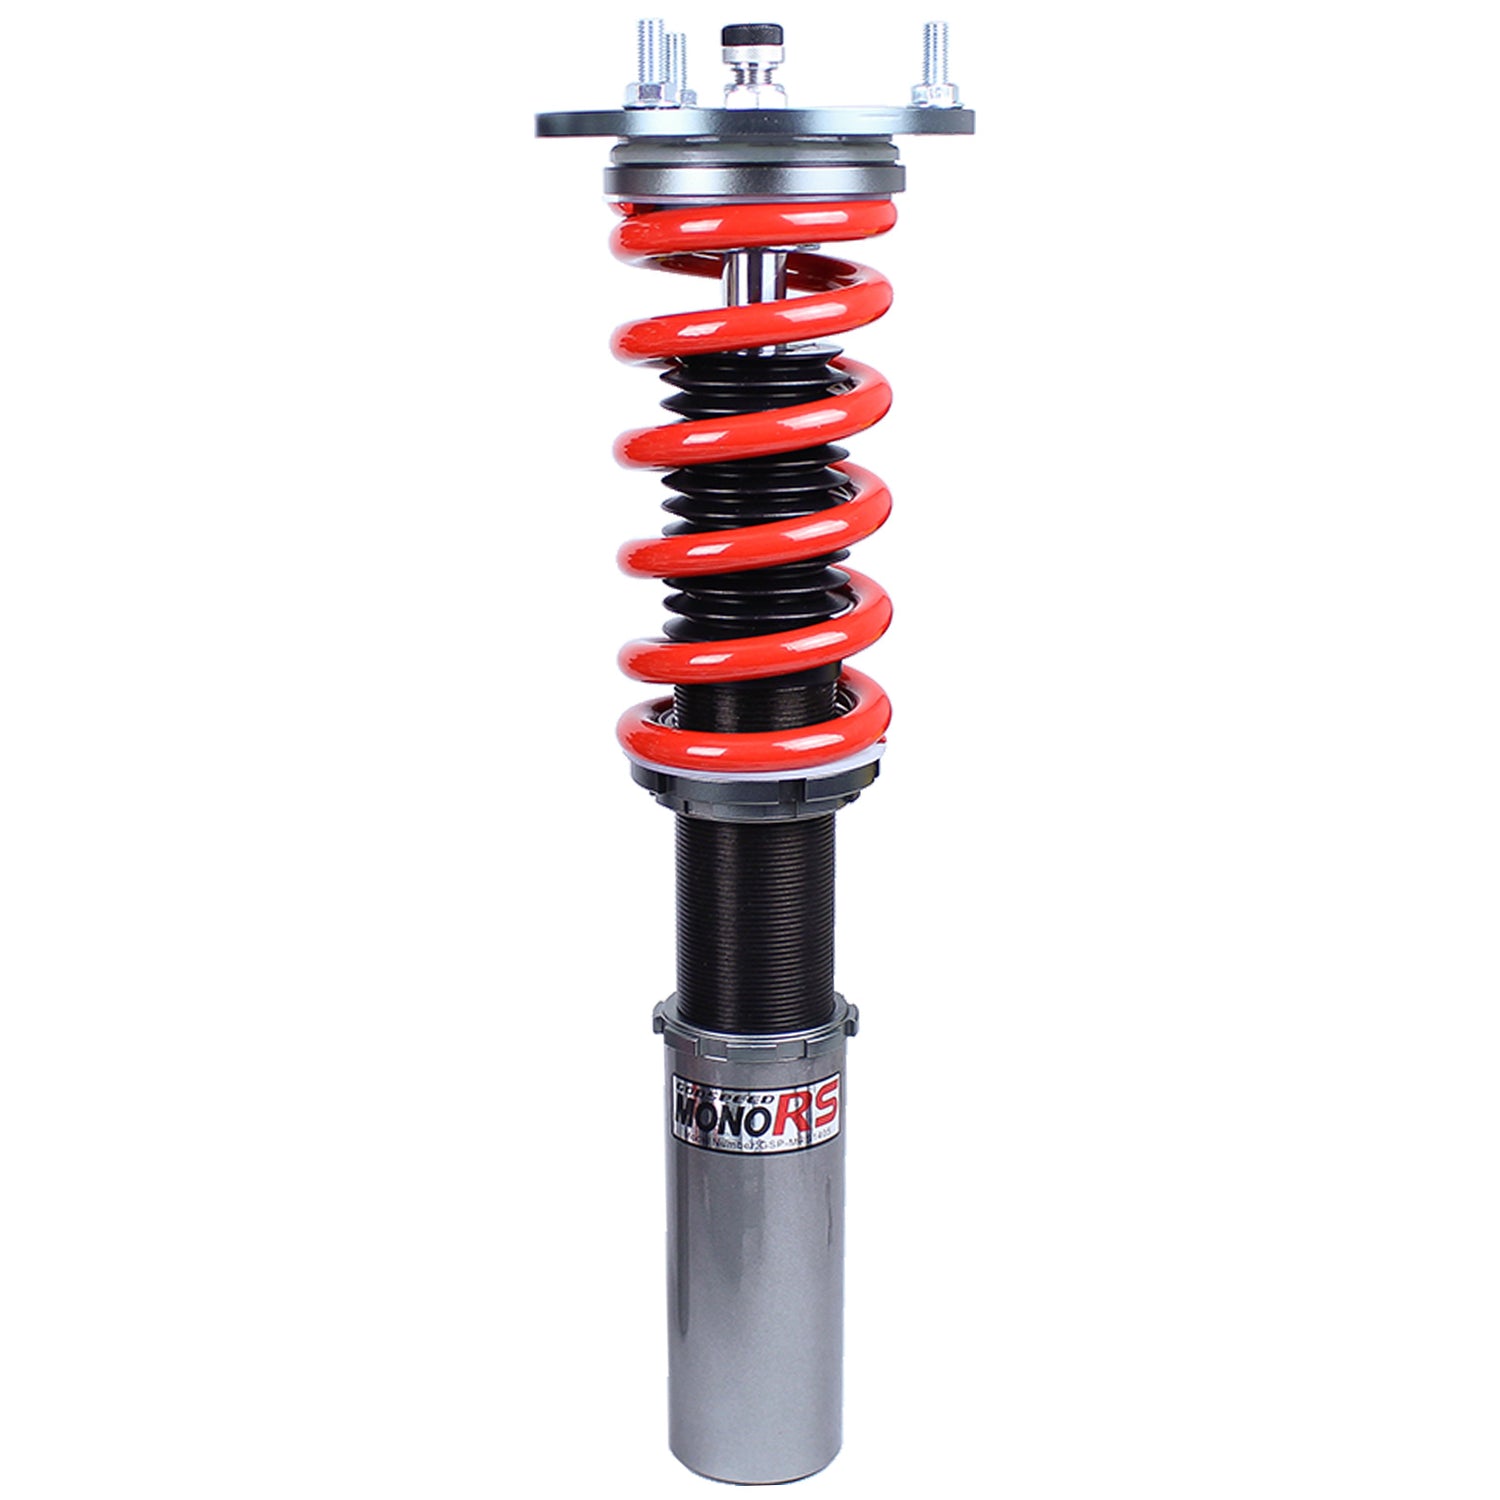 Godspeed MRS1405 MonoRS Coilover Lowering Kit, 32 Damping Adjustment, Ride Height Adjustable